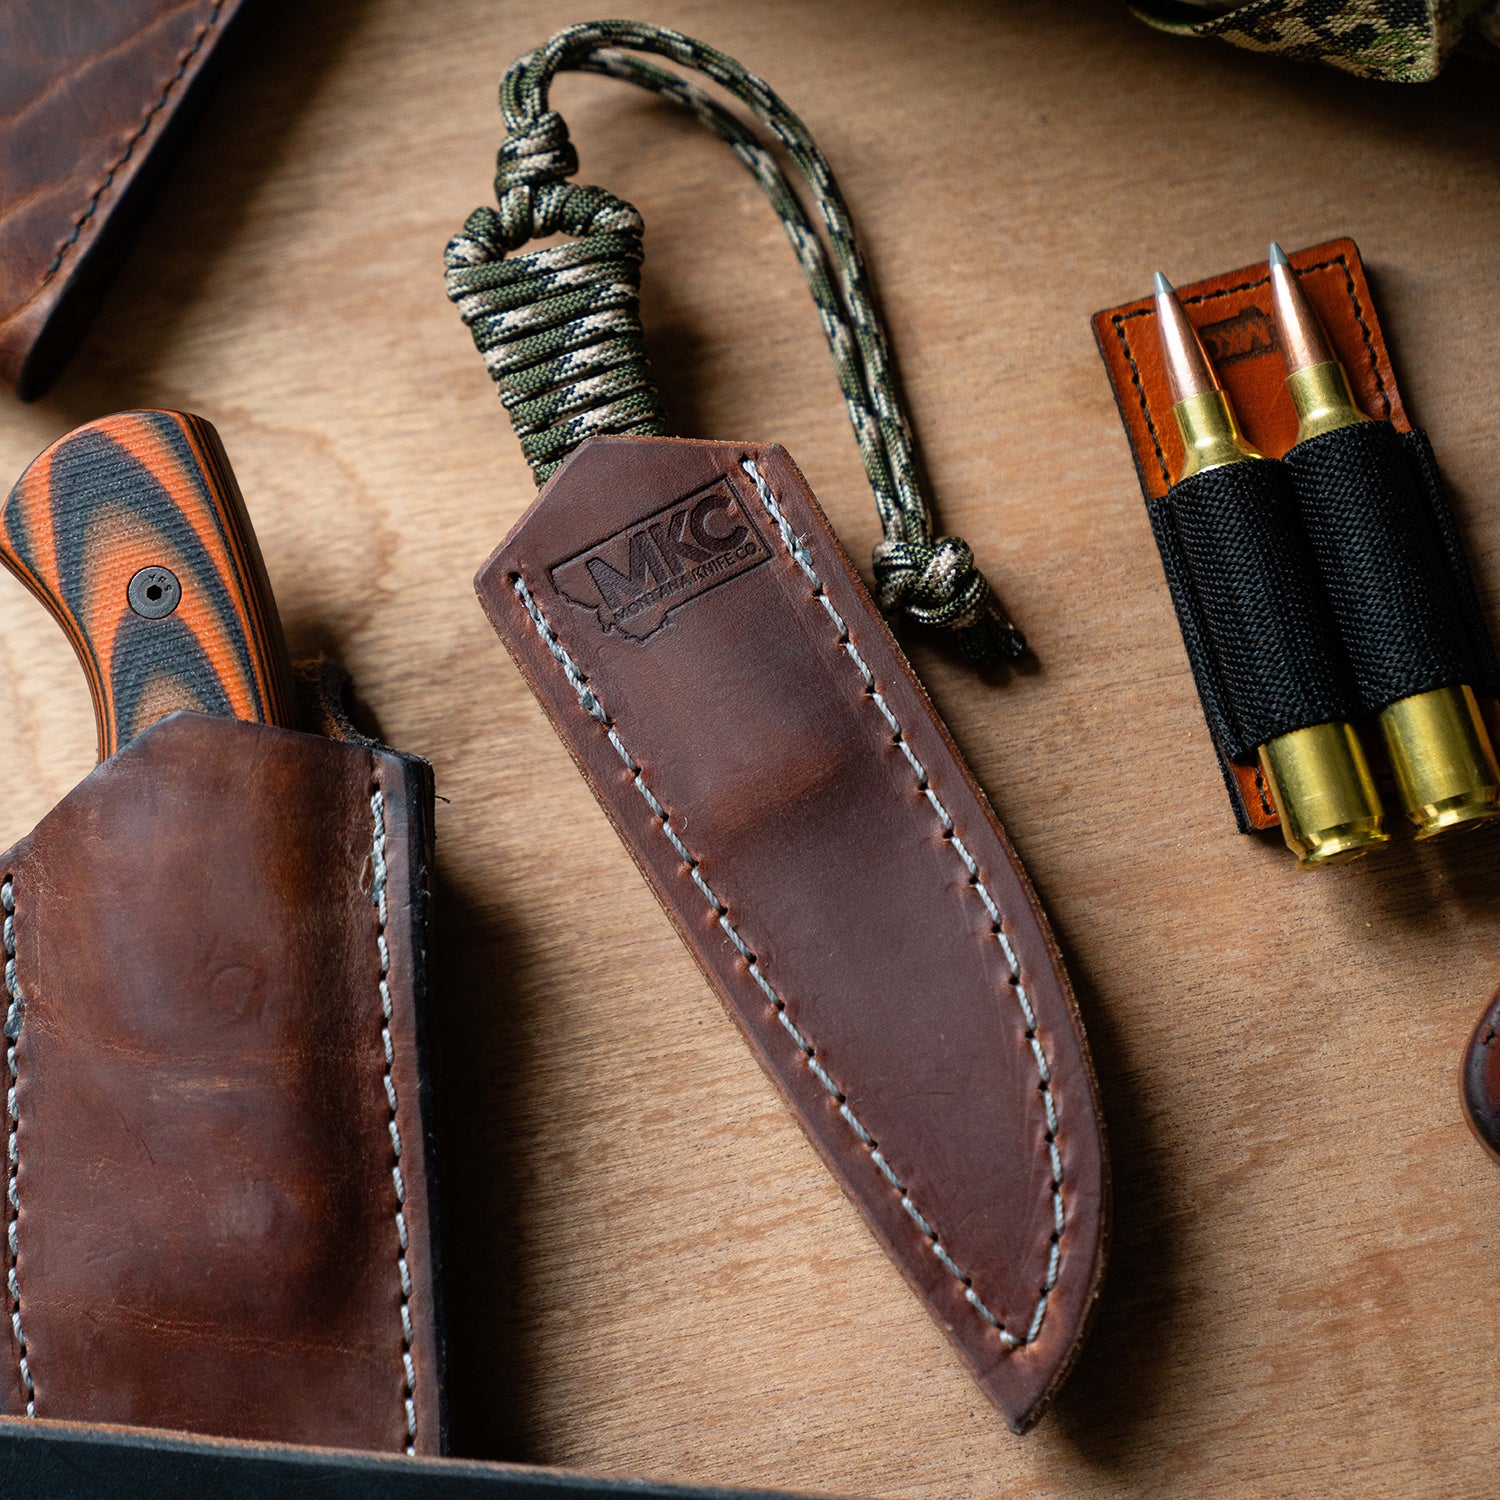 MINI SPEEDGOAT LEATHER SHEATH - CONCEALED POCKET CARRY